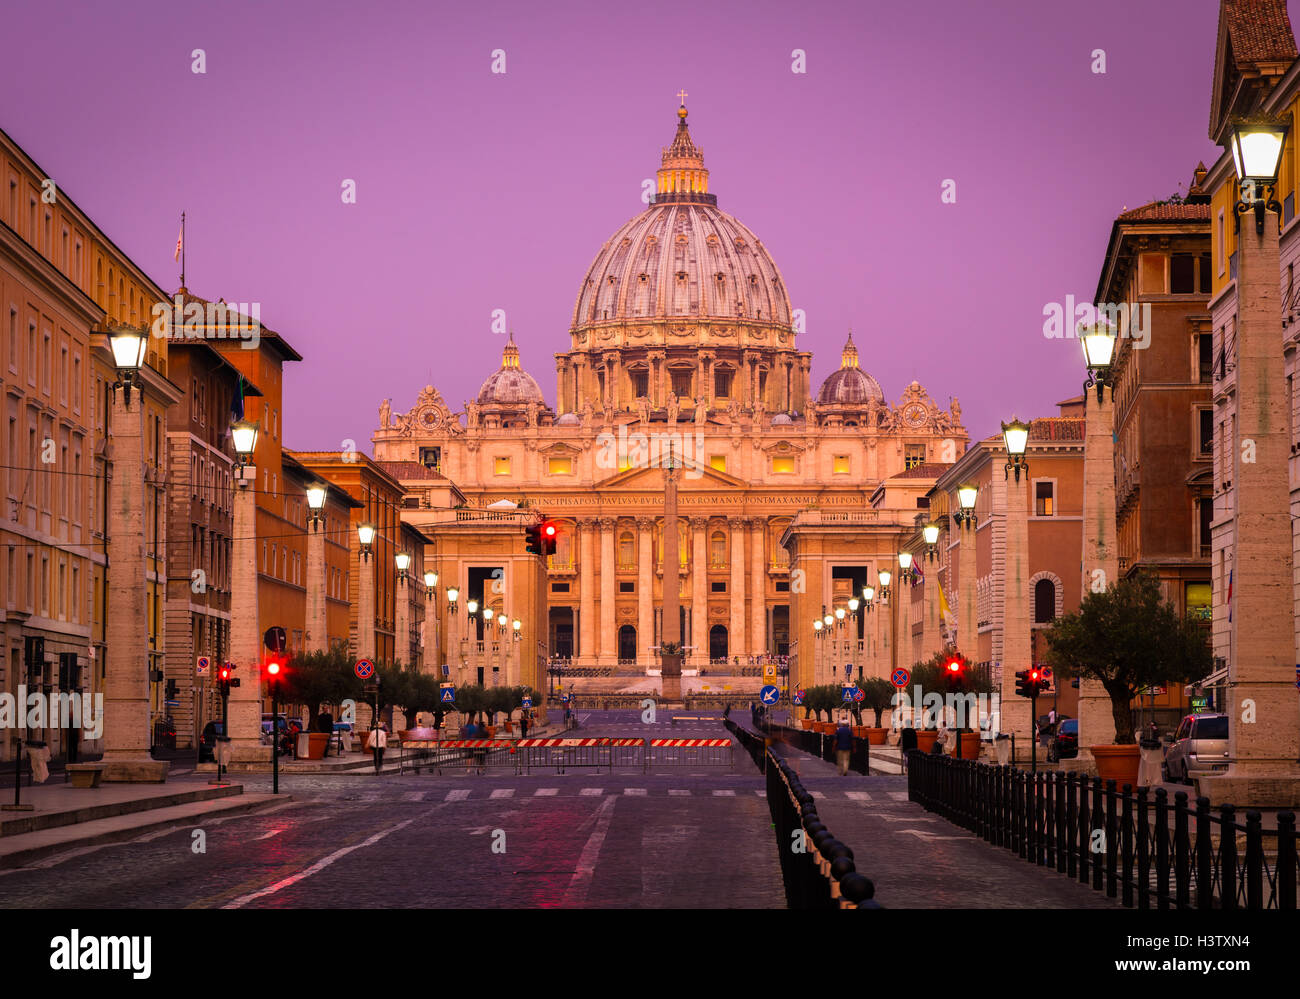 St. Peter's Basilica is a Late Renaissance church located within the Vatican City. Stock Photo